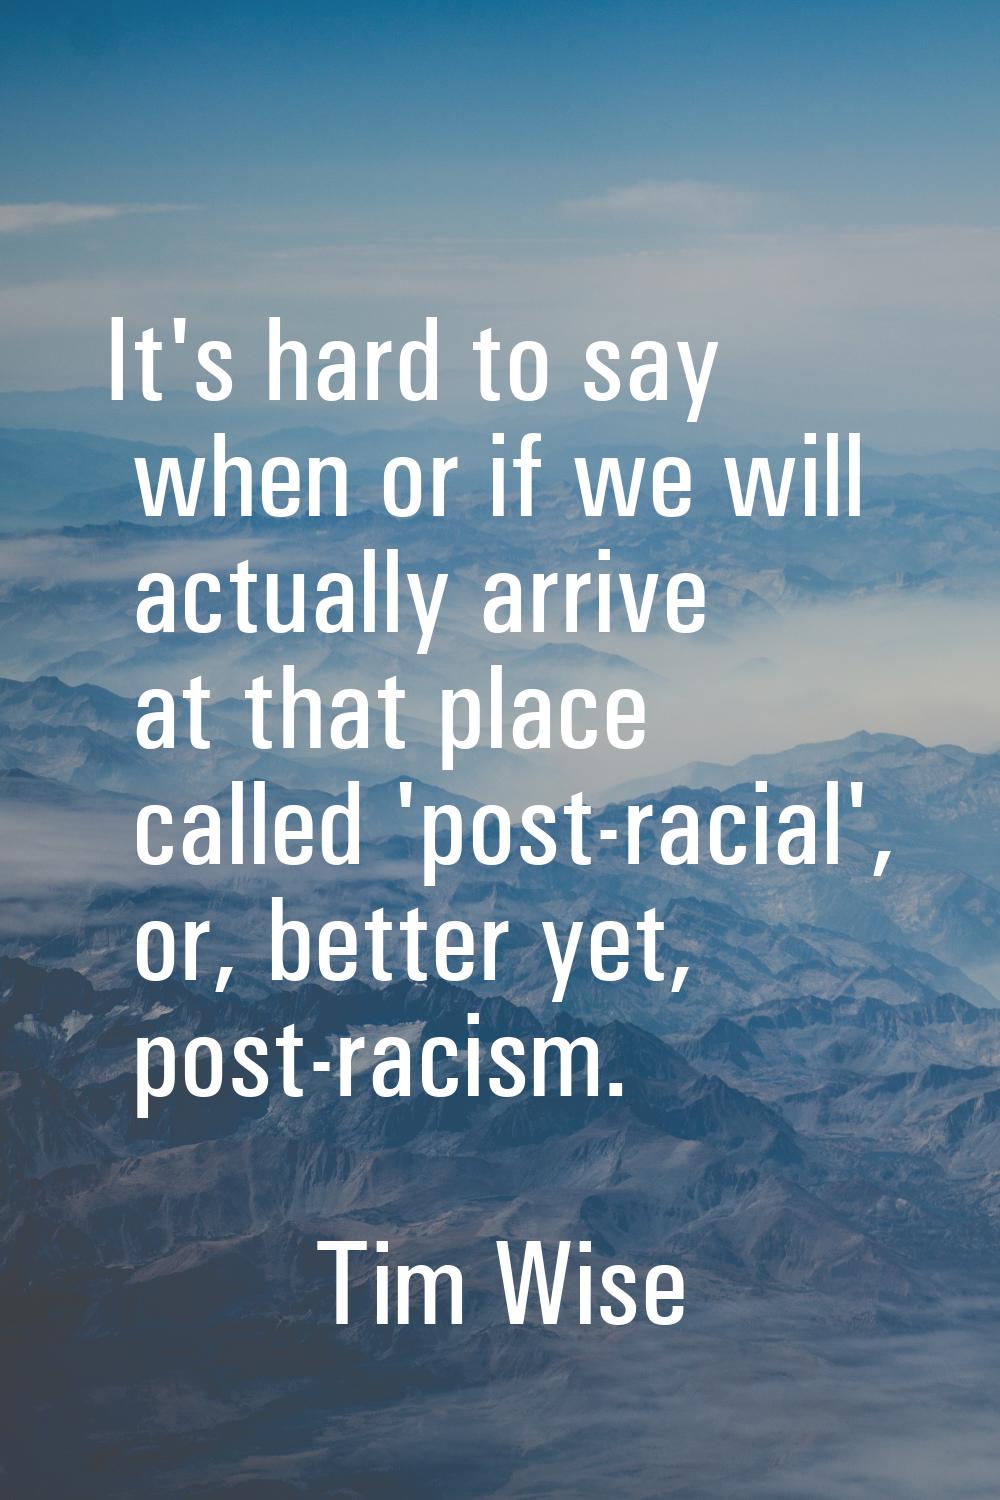 It's hard to say when or if we will actually arrive at that place called 'post-racial', or, better 